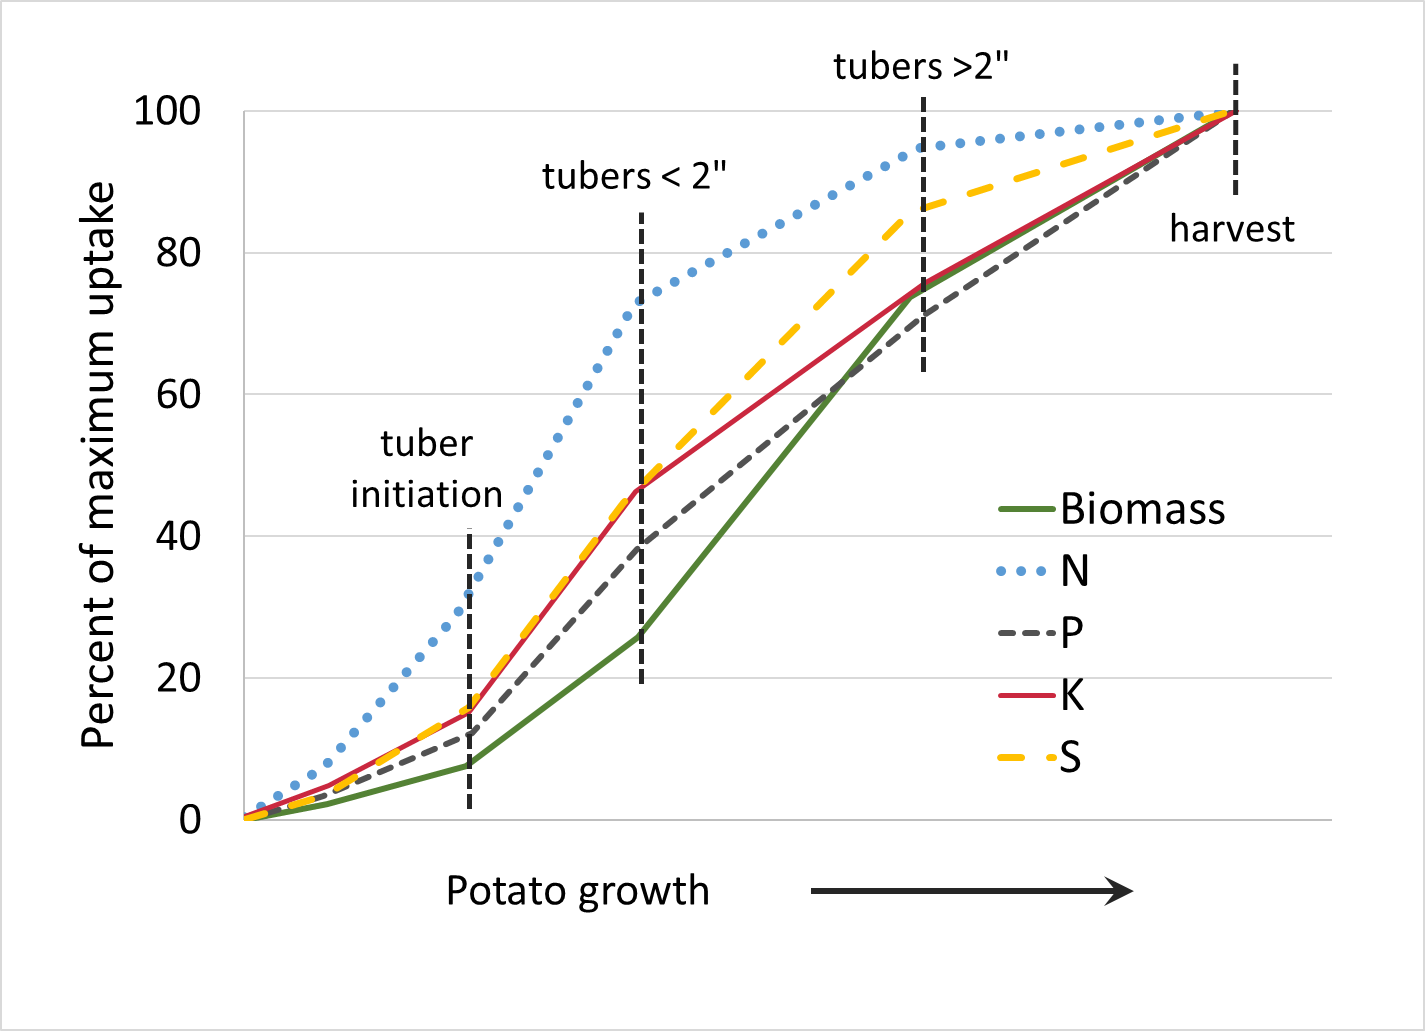 Potato: N uptake occurs fastest. The highest uptake rates occur after tuber initiation. Uptake for all nutrients reaches 100% at harvest.